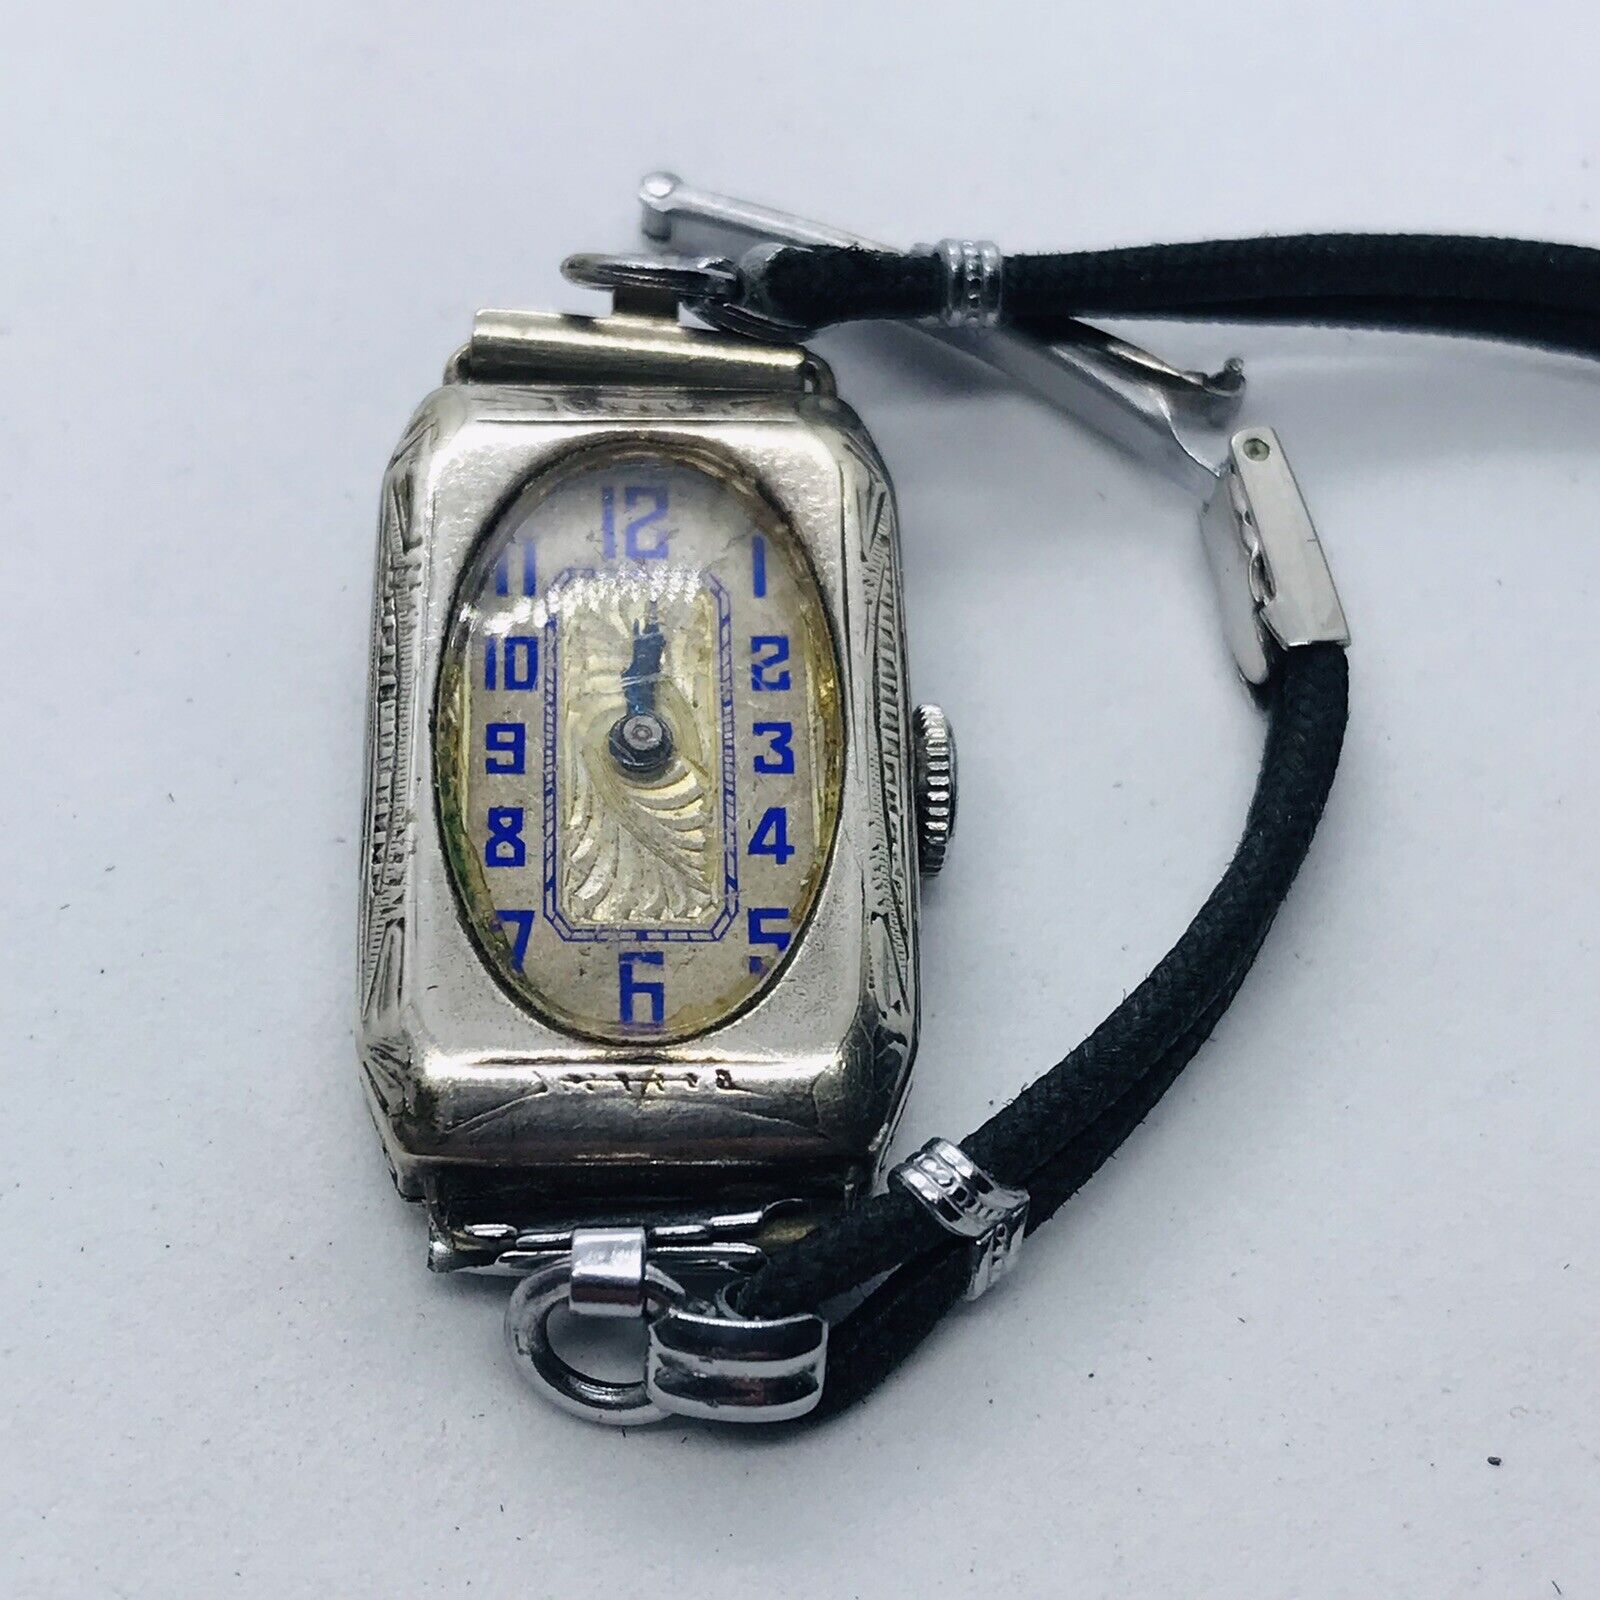 ANTIQUE WHITE GOLD FILLED WRISTWATCH 10 KT. MARKED BLUE DIAL FOR REPAIR